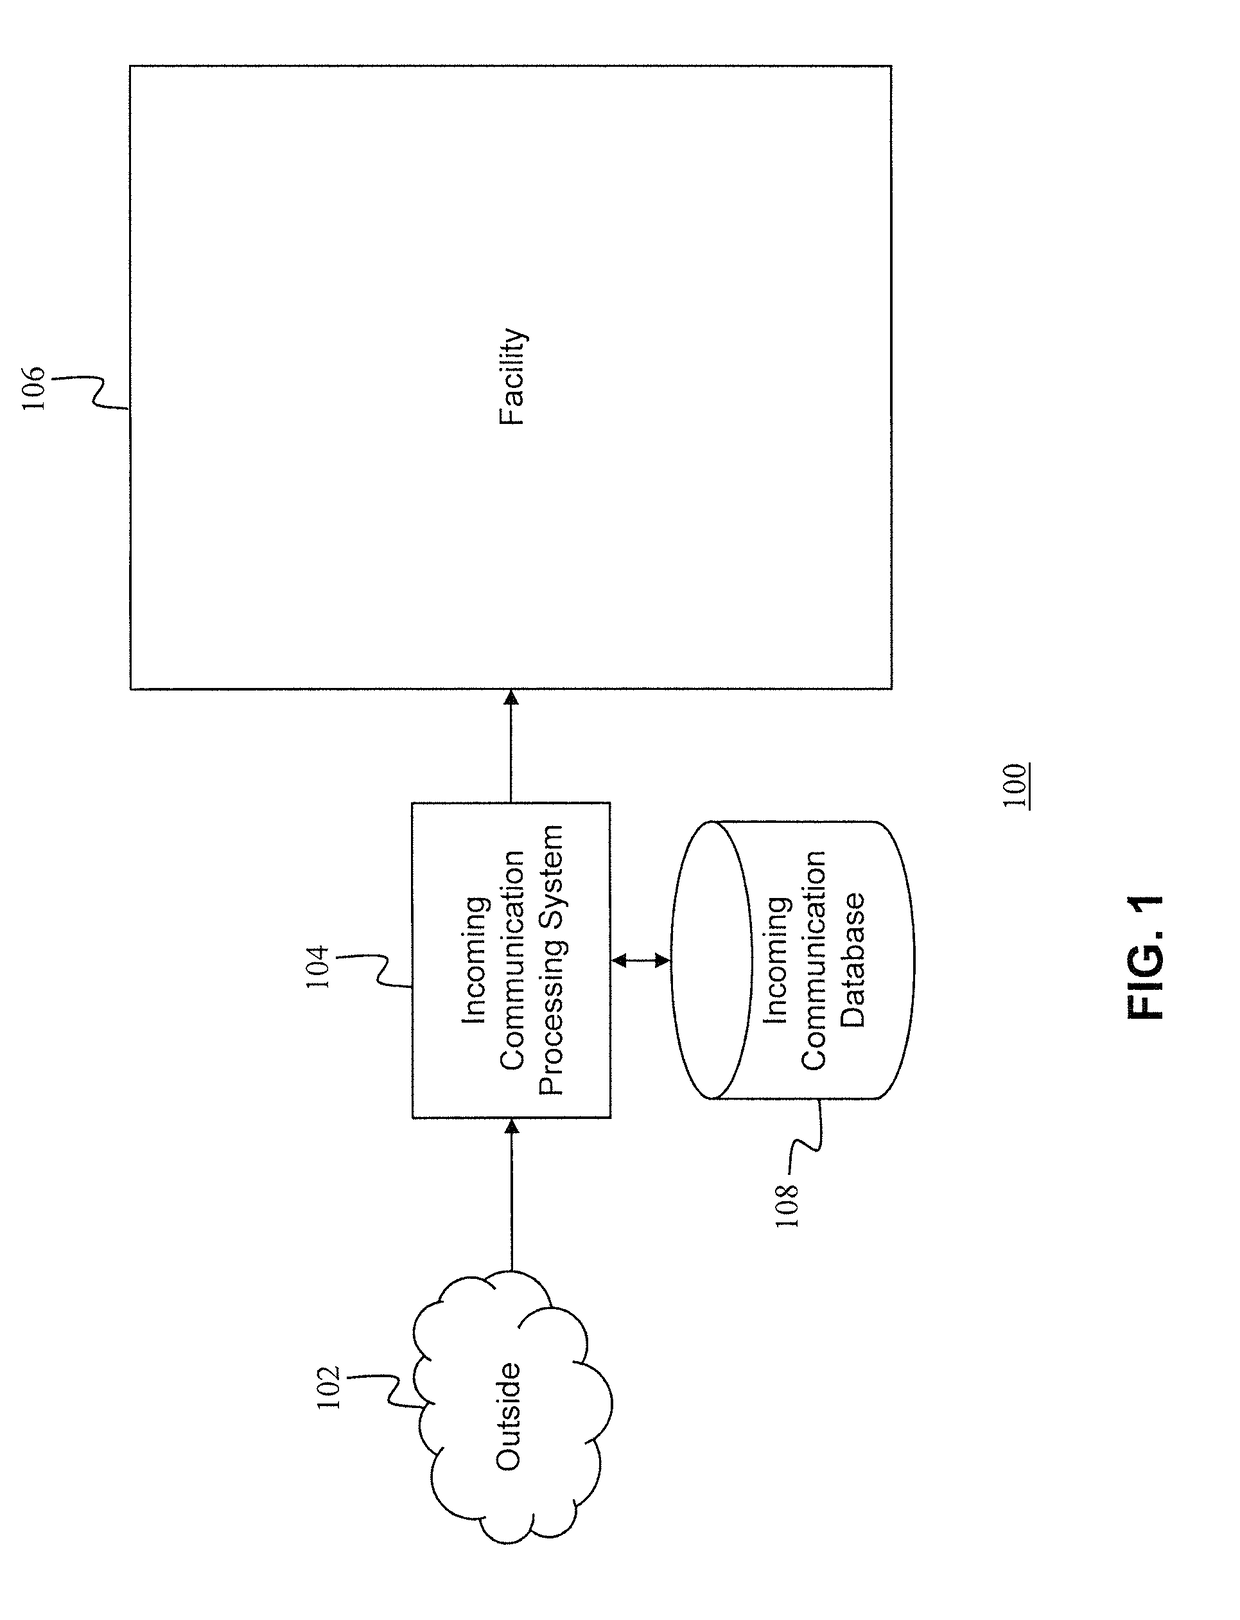 Authentication and control of incoming communication